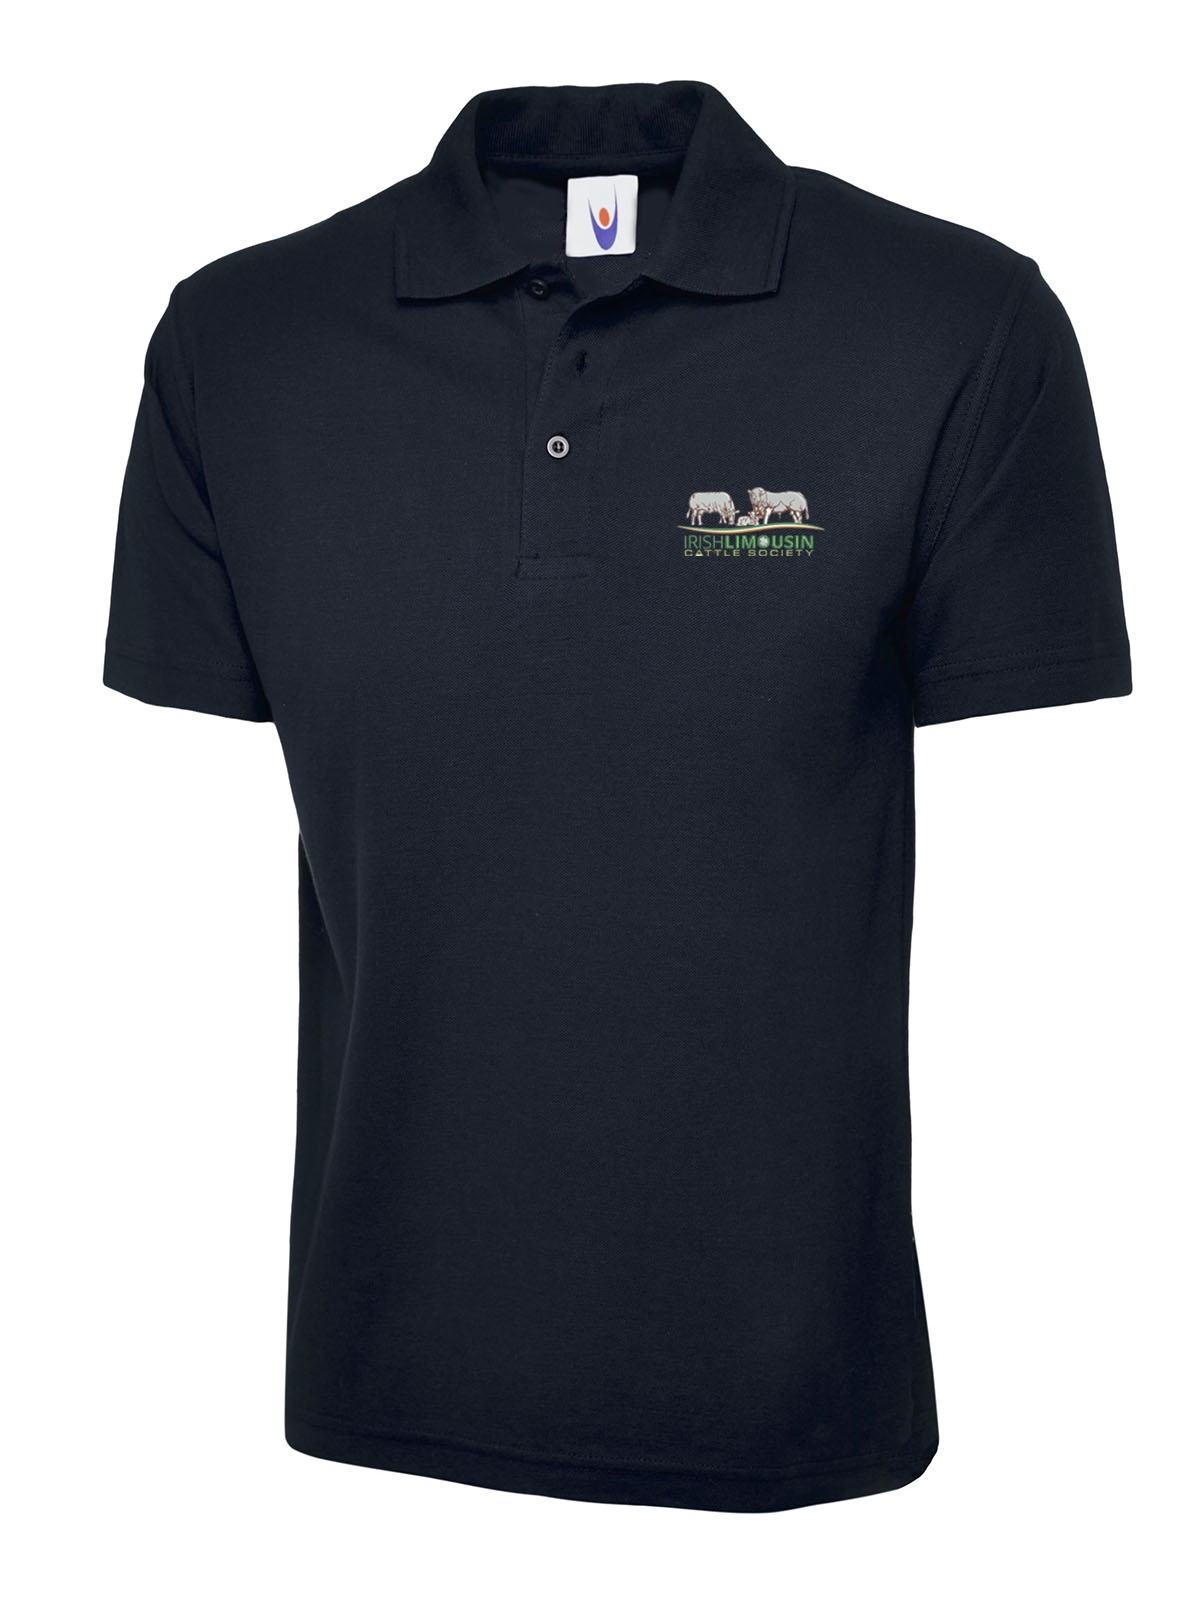 products-irish_limousin_uc101_adult_navy_polo